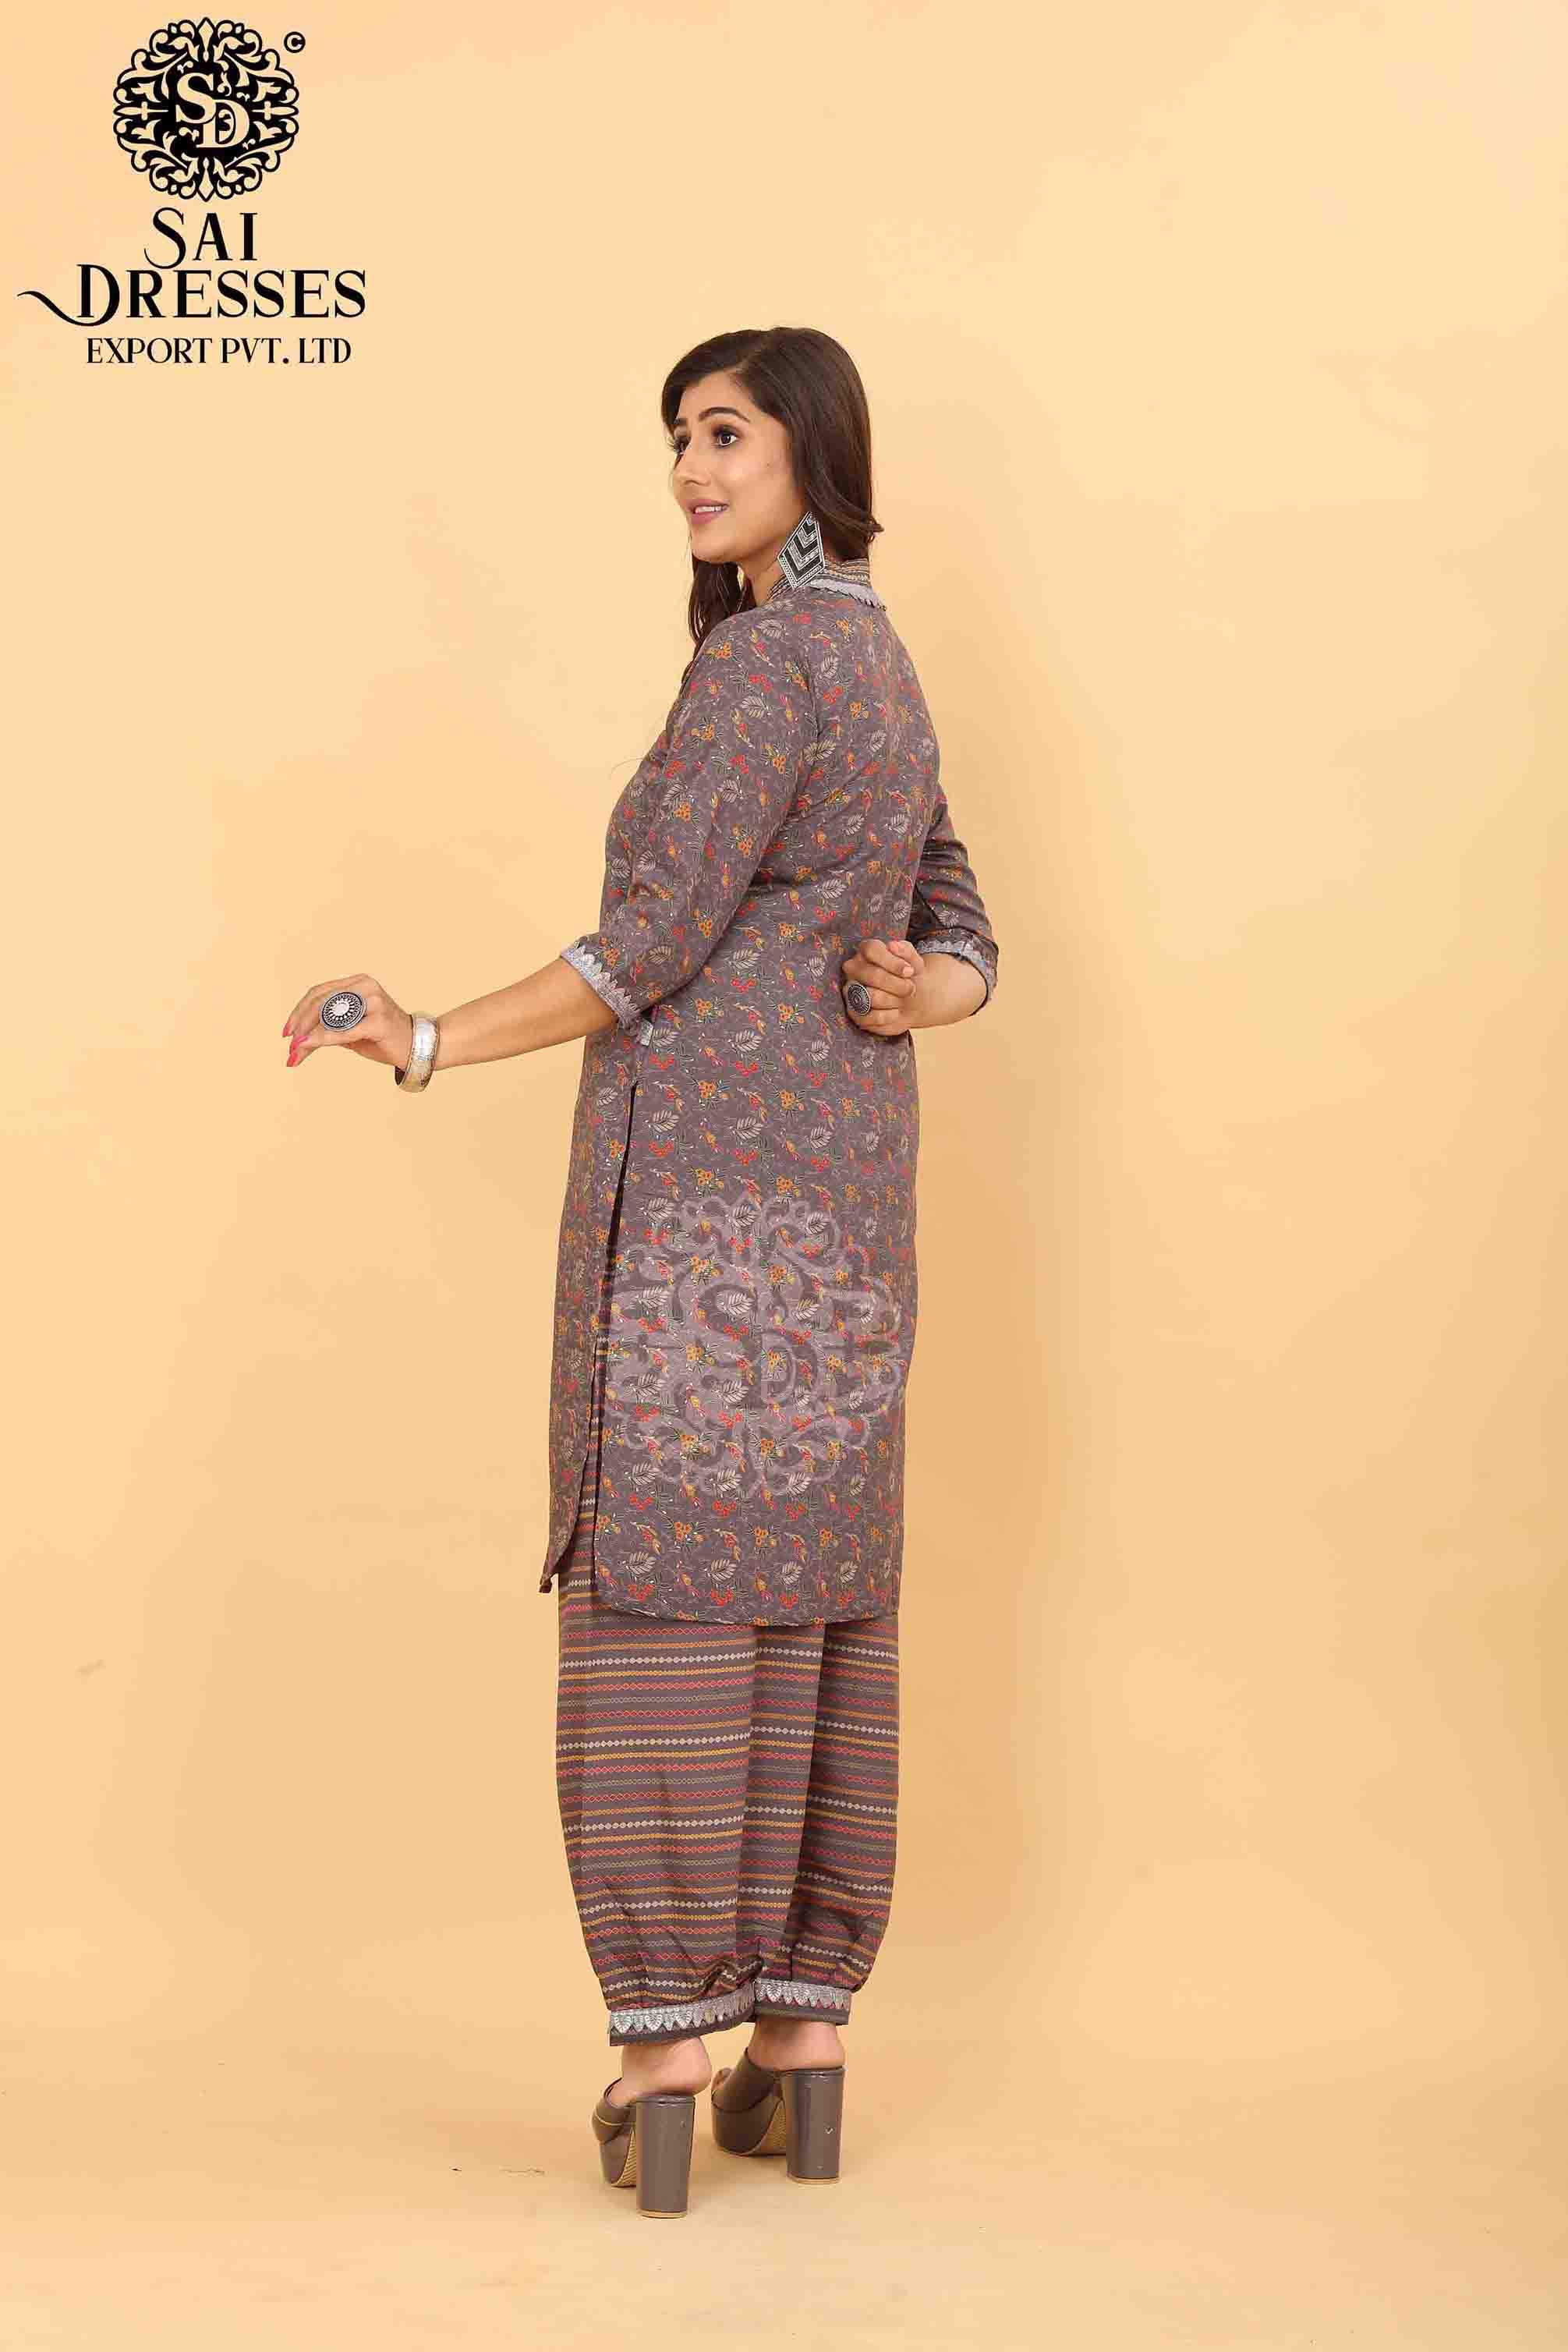 SAI DRESSES PRESENT D.NO SD 5018 READY TO EXCLUSIVE TRENDY WEAR PATHANI KURTA WITH AFGHANI PANT STYLE COMBO COLLECTION IN WHOLESALE RATE IN SURAT